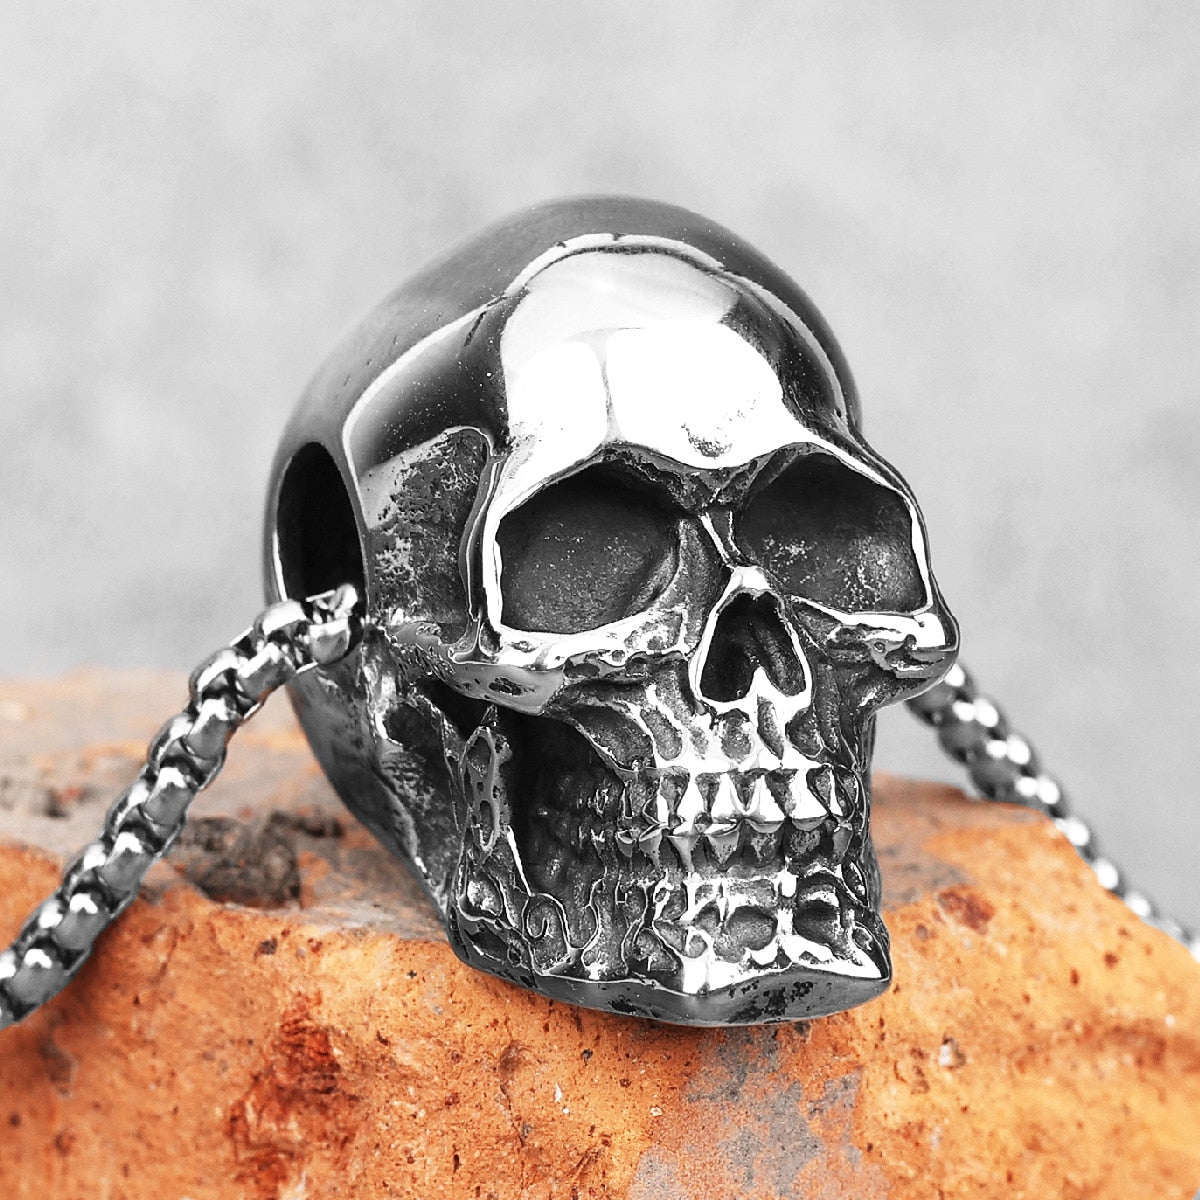 Stainless Steel Skull Necklace